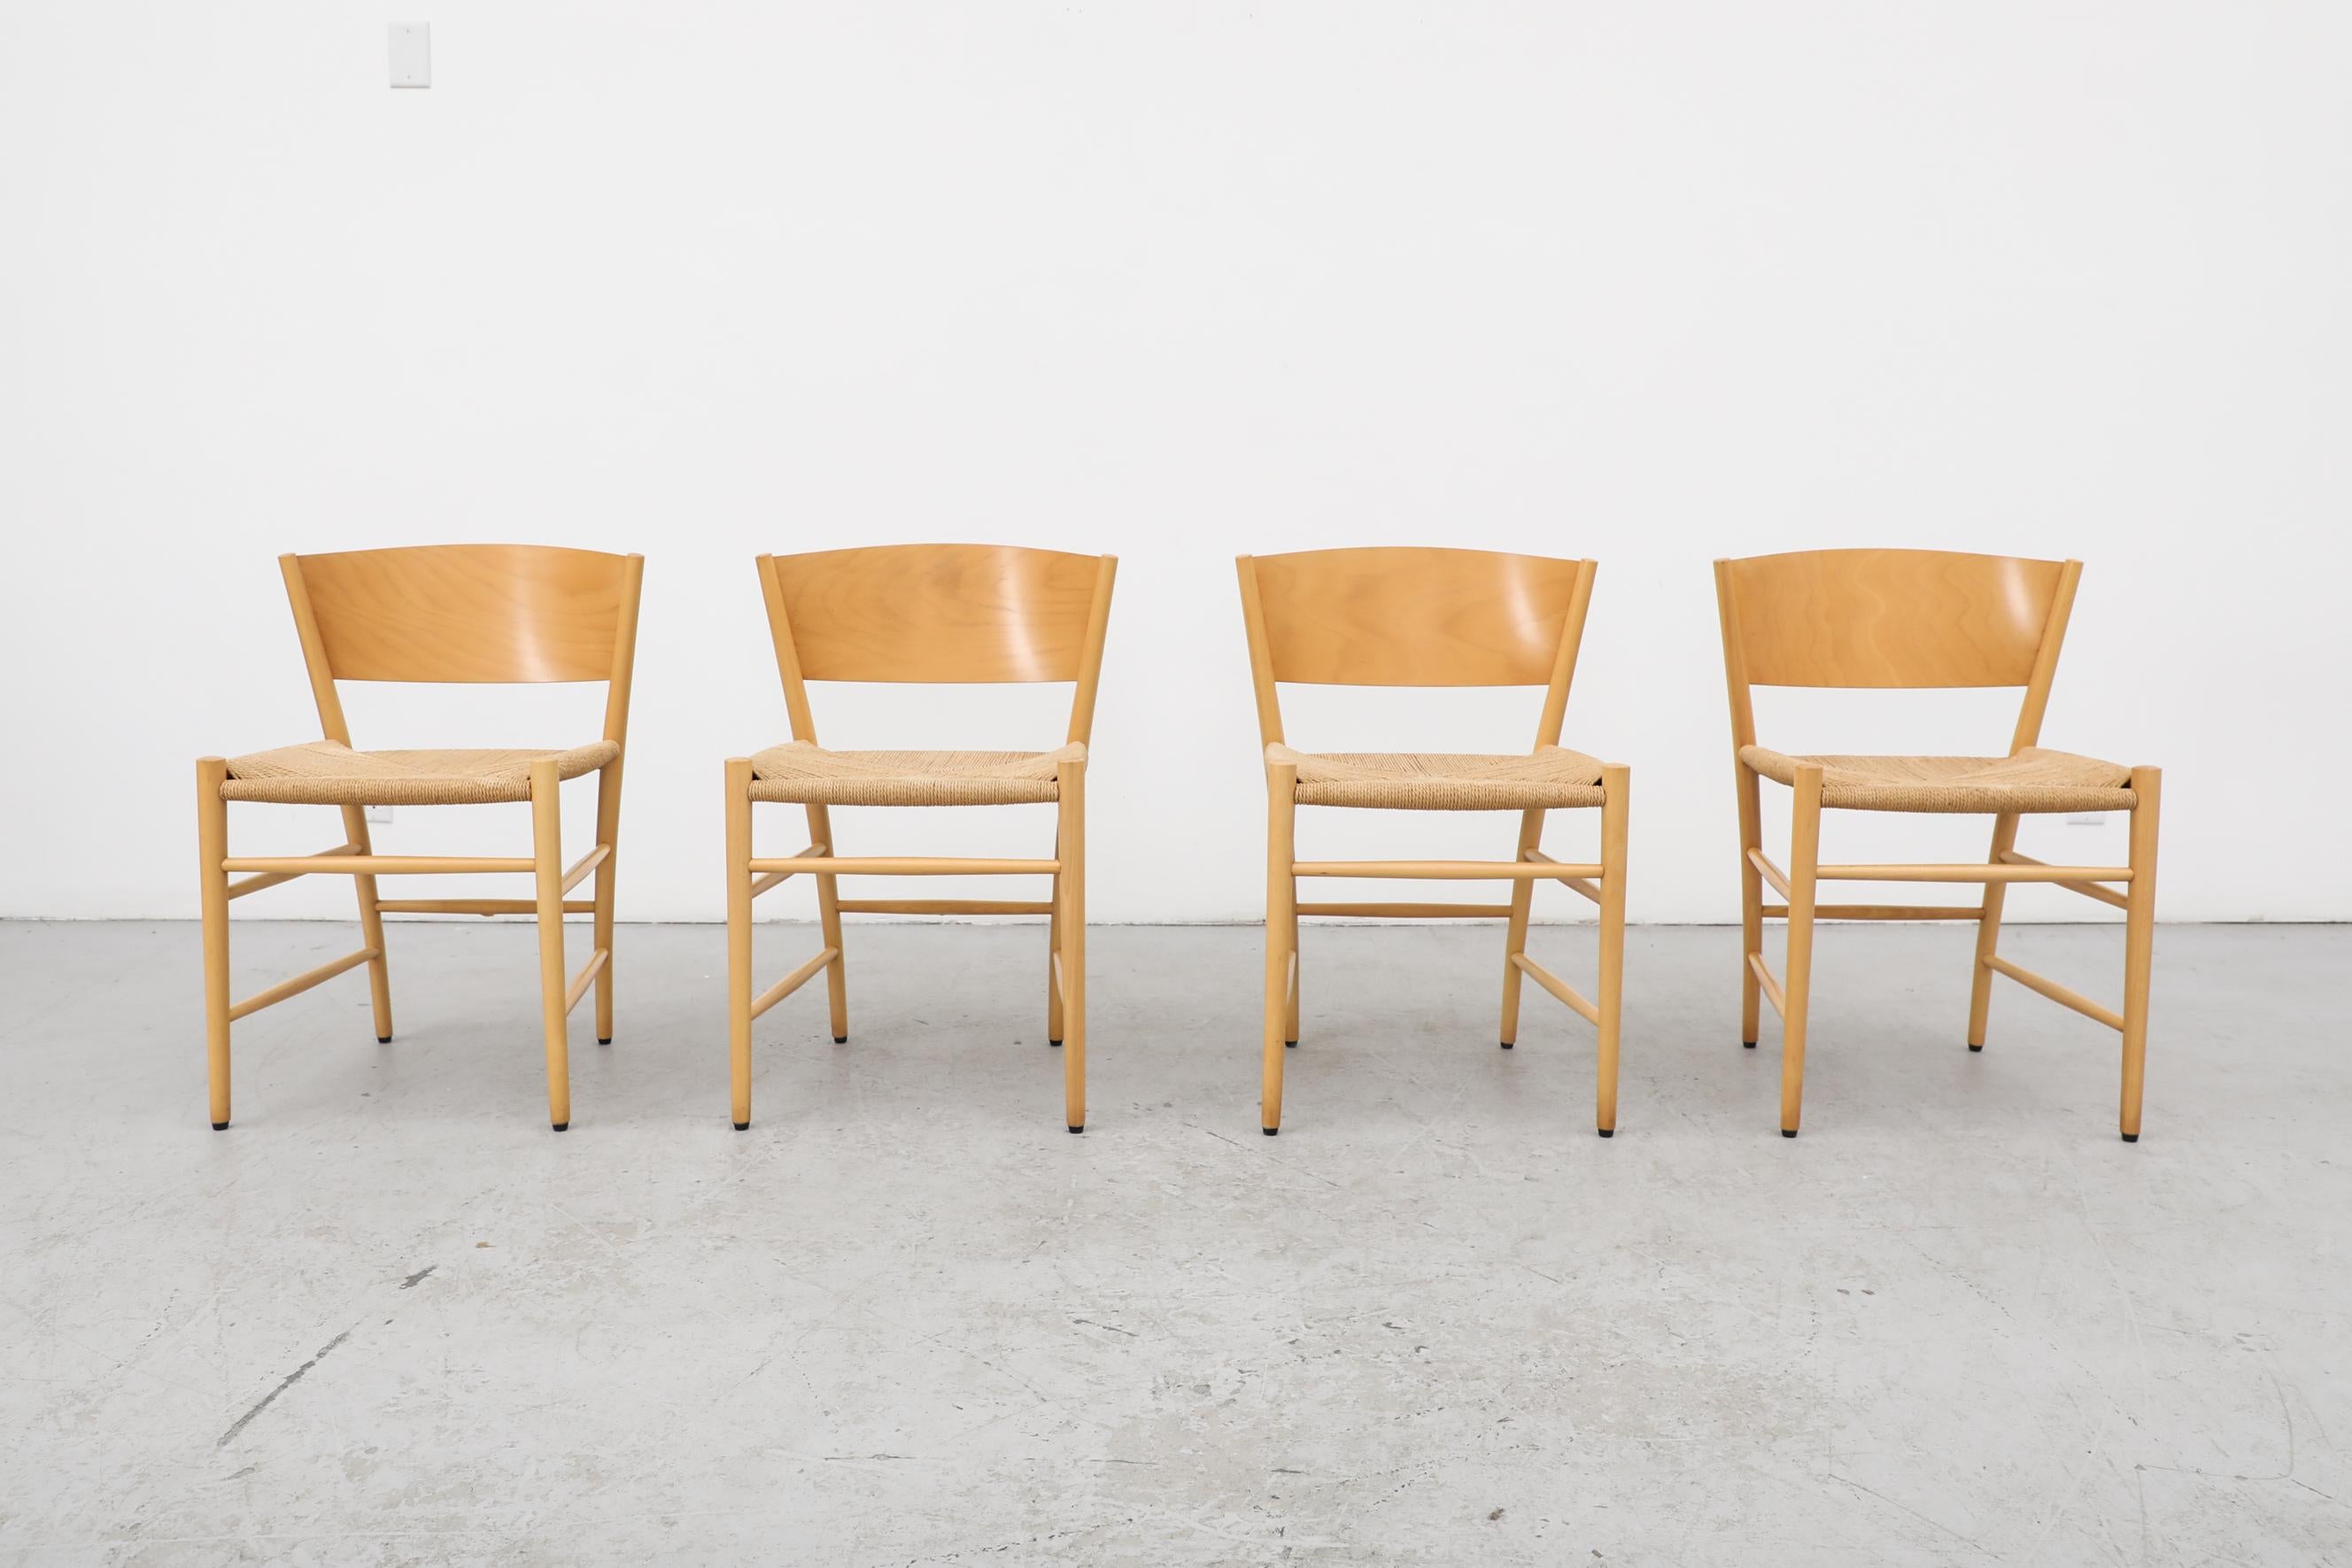 Set of 4 1990s Danish 'Jive' chairs by Tom Stepp for Kvist Møbler. The chairs have woven seats and birch frames. In original condition with visible wear and patina consistent with its age and use.